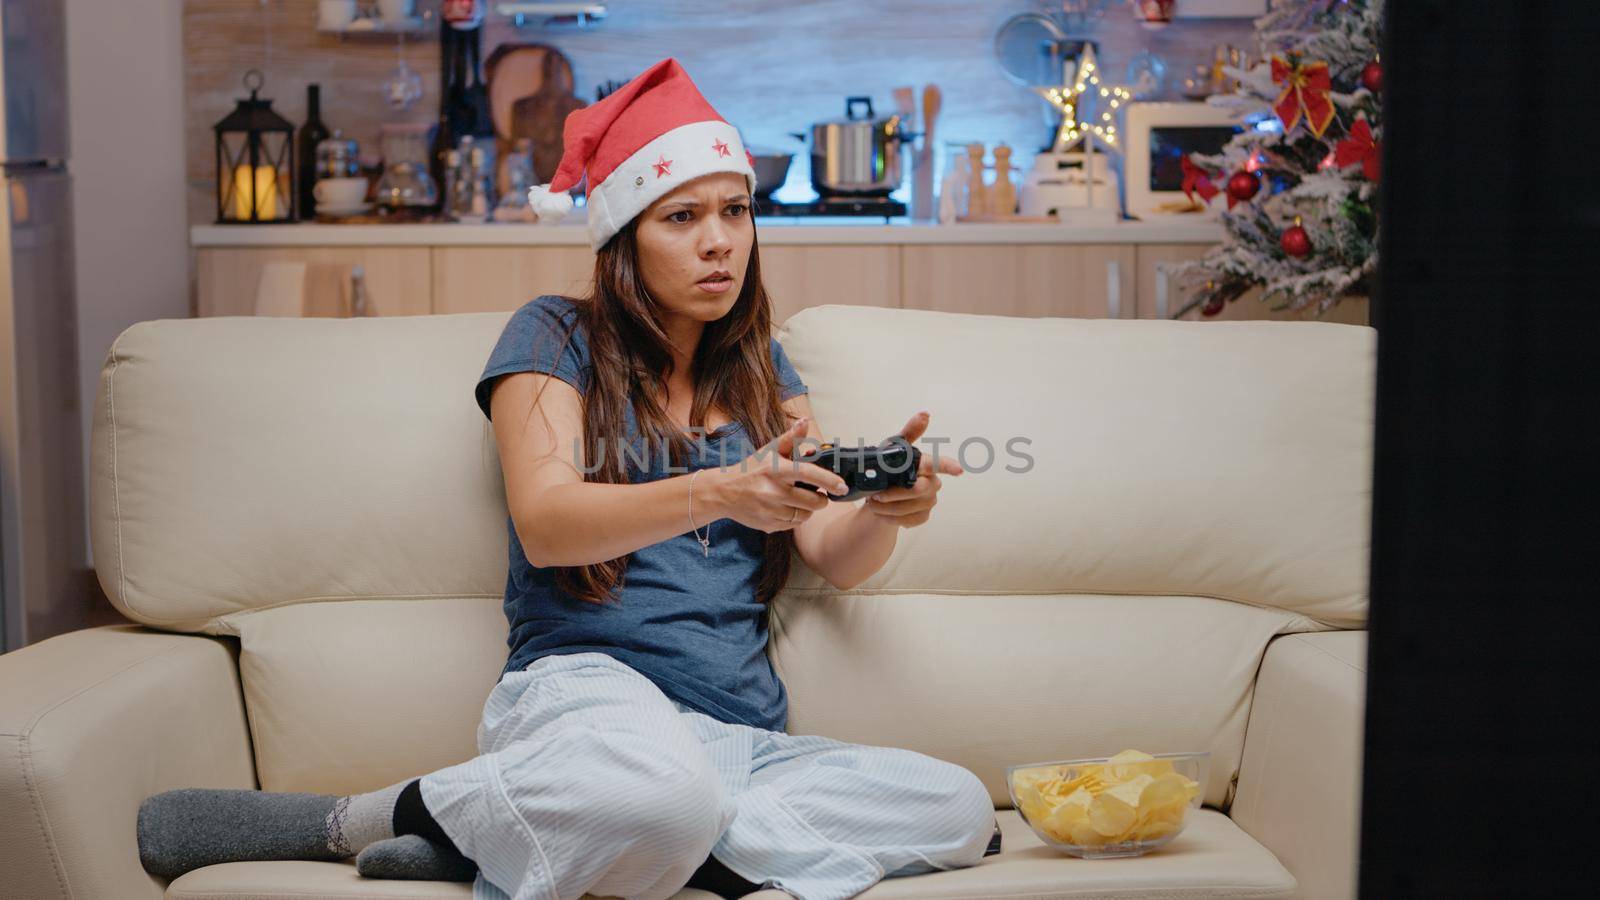 Unhappy adult losing at video games with joystick on tv console. Woman playing online game using controller at television on christmas eve for holiday celebration. Festive person